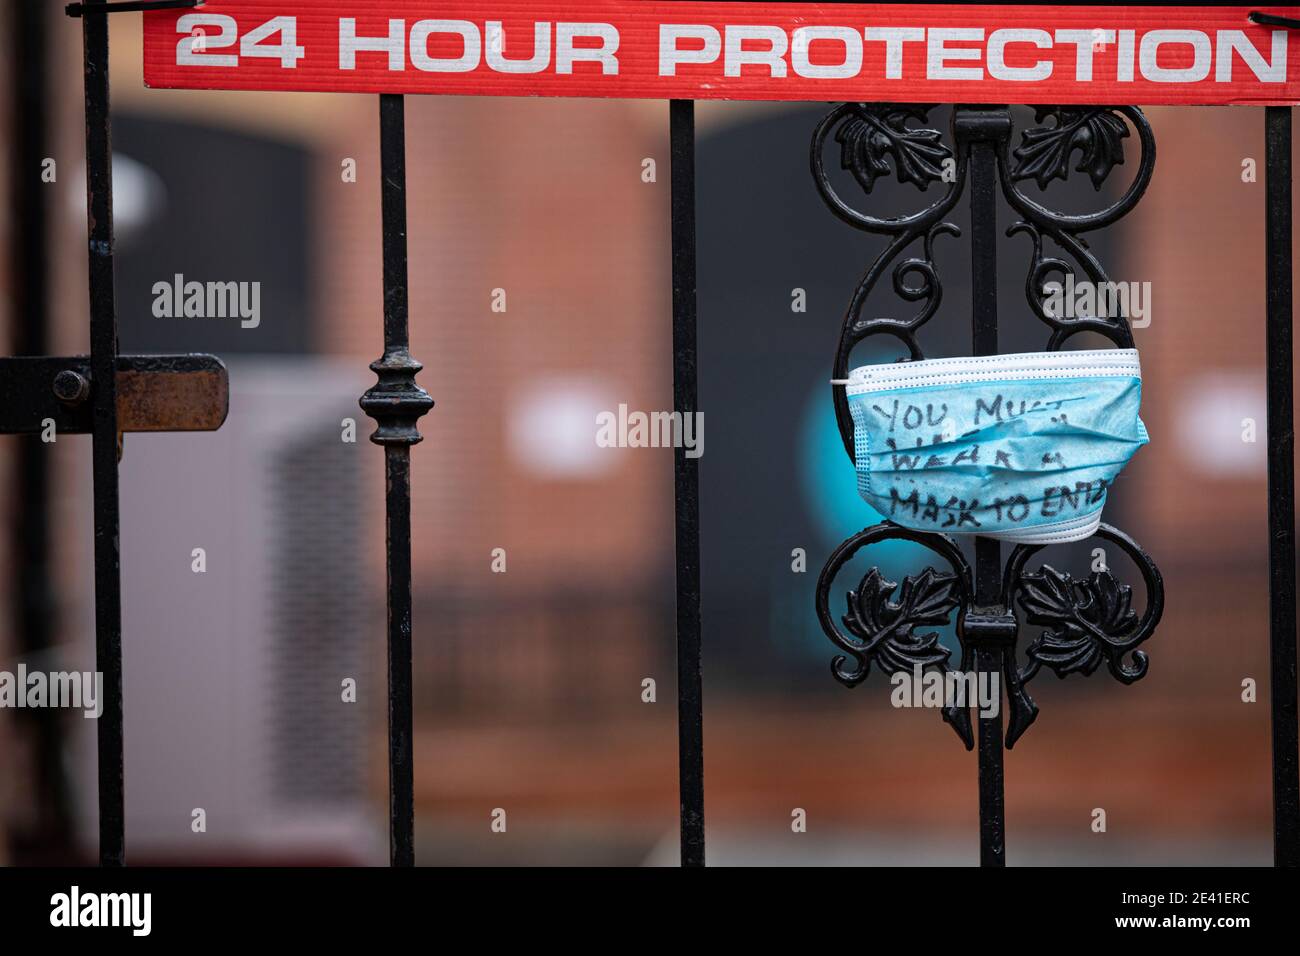 24 hour protection ... a locked gate with a face mask with the words 'You must wear a face mask to enter here' written on it Stock Photo